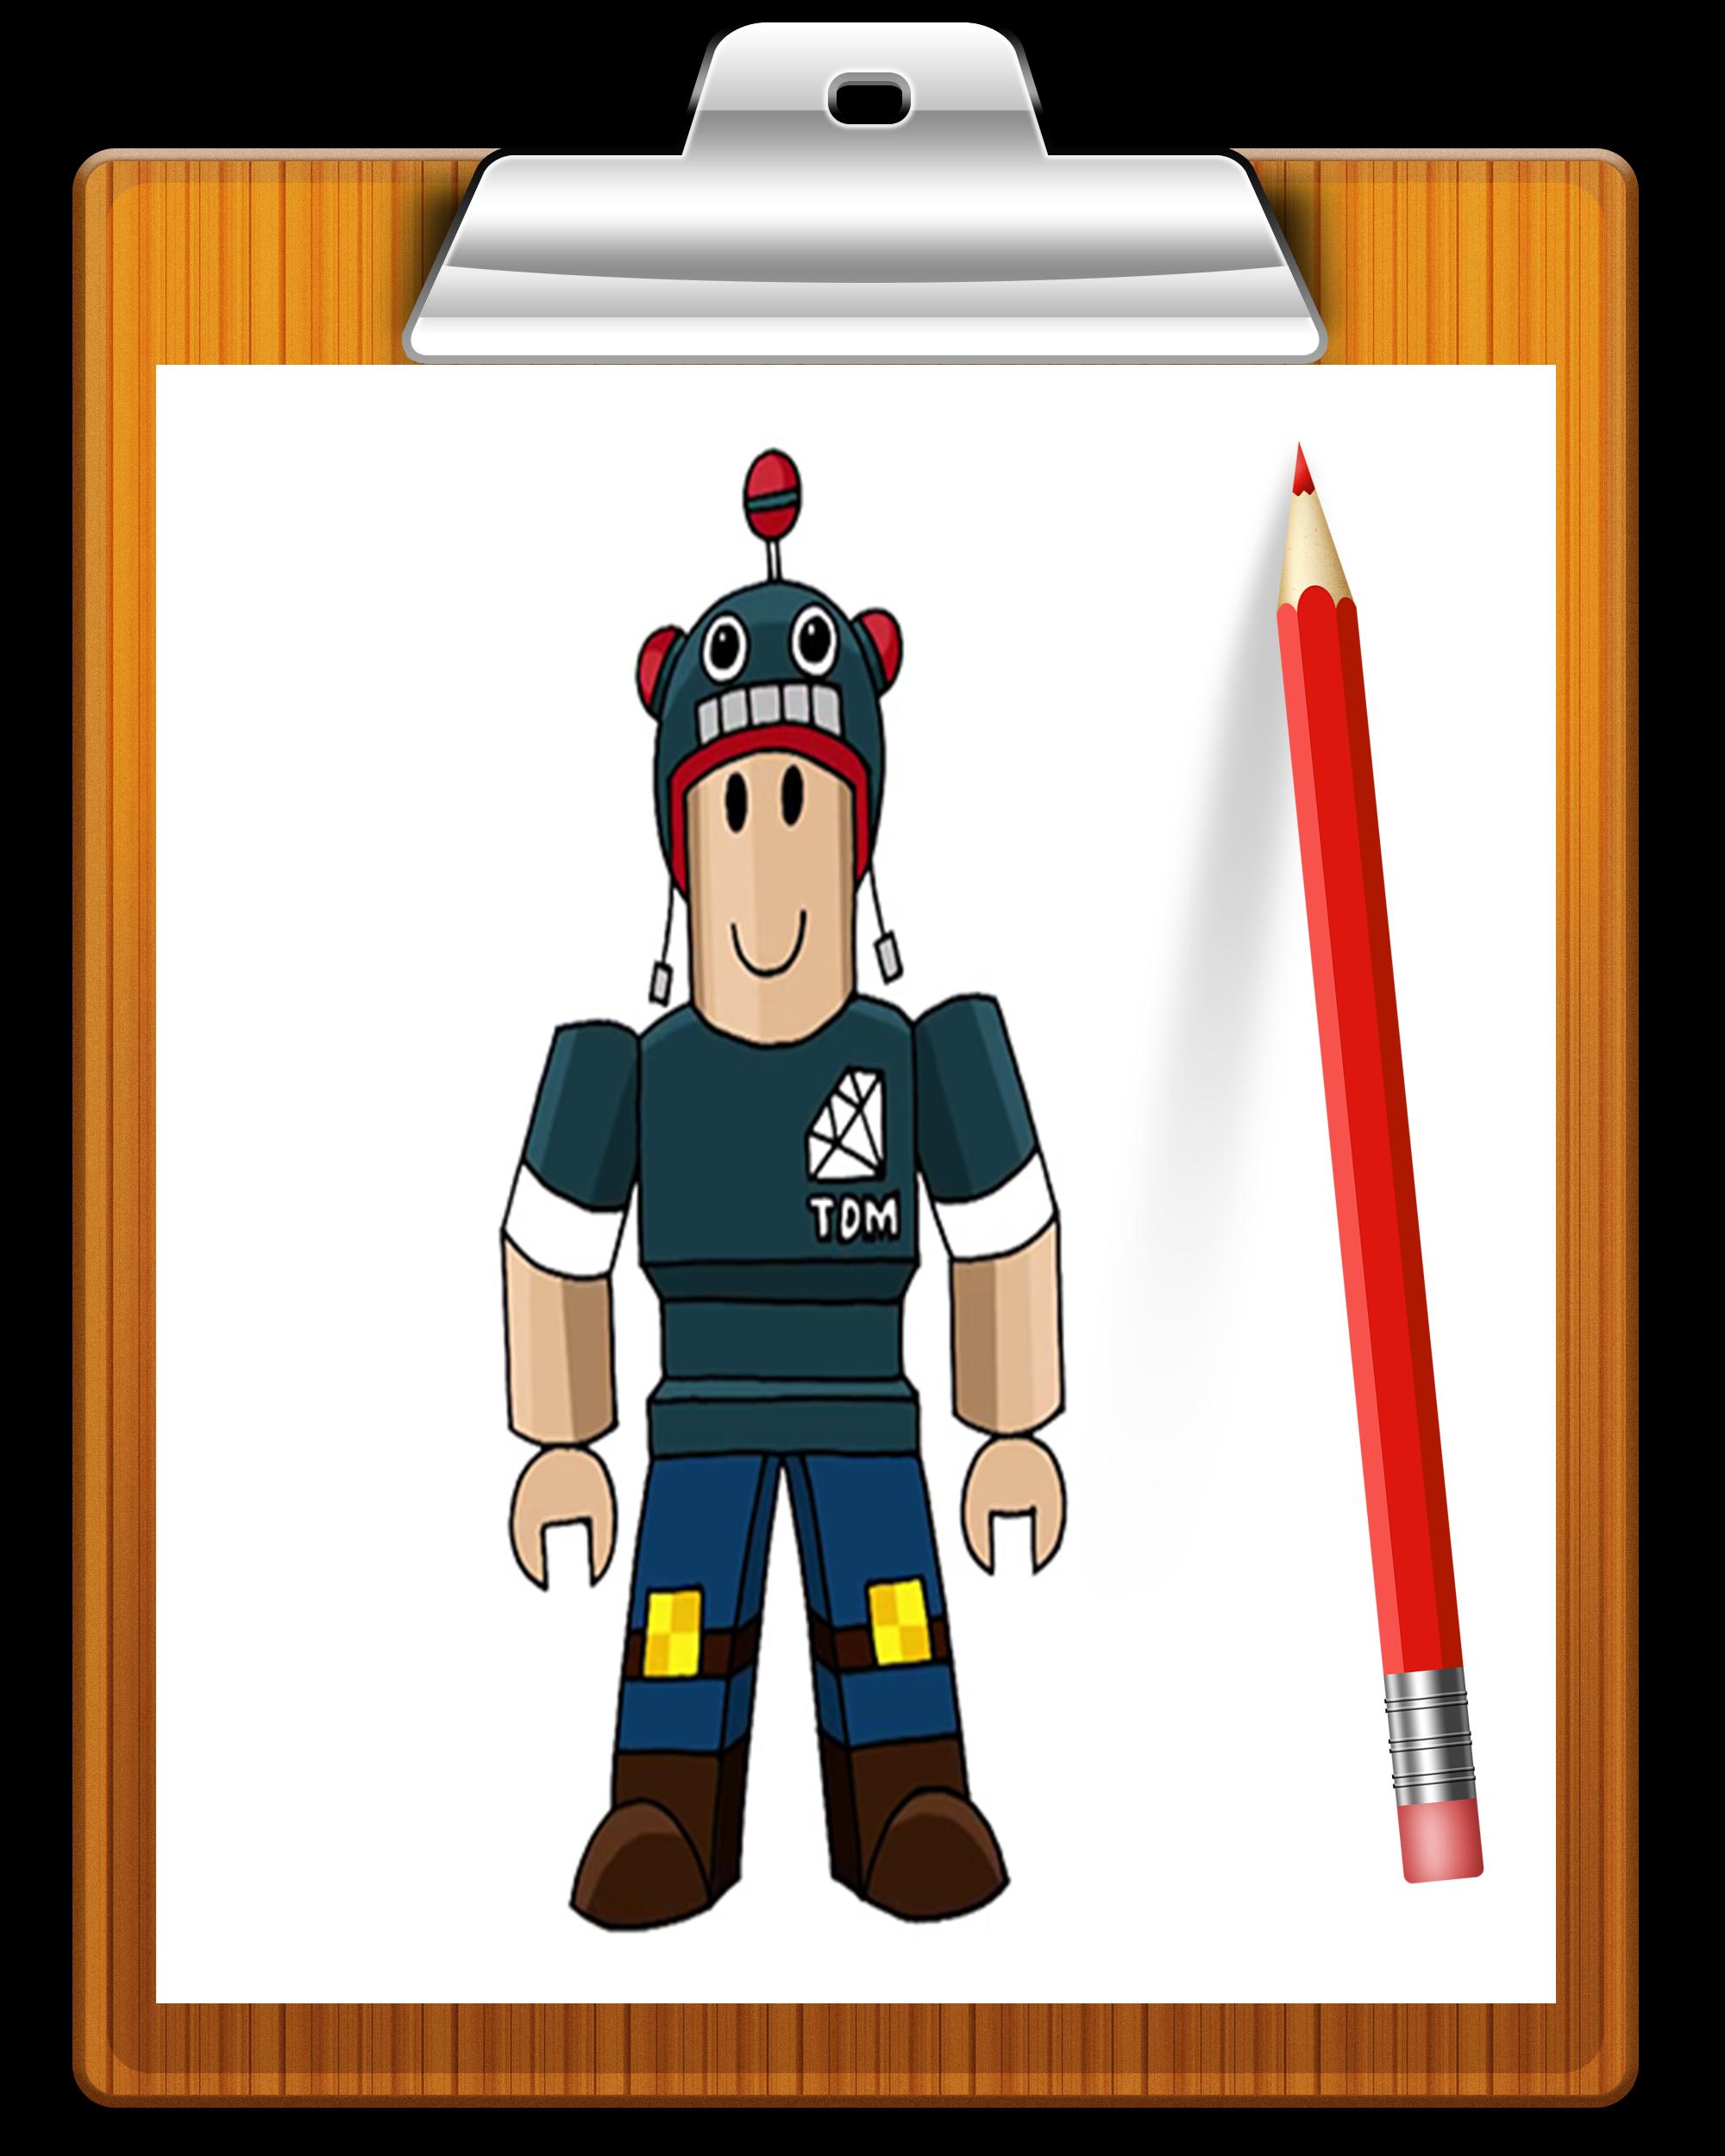 How To Draw Roblox For Android Apk Download - how to draw roblox fans for android apk download